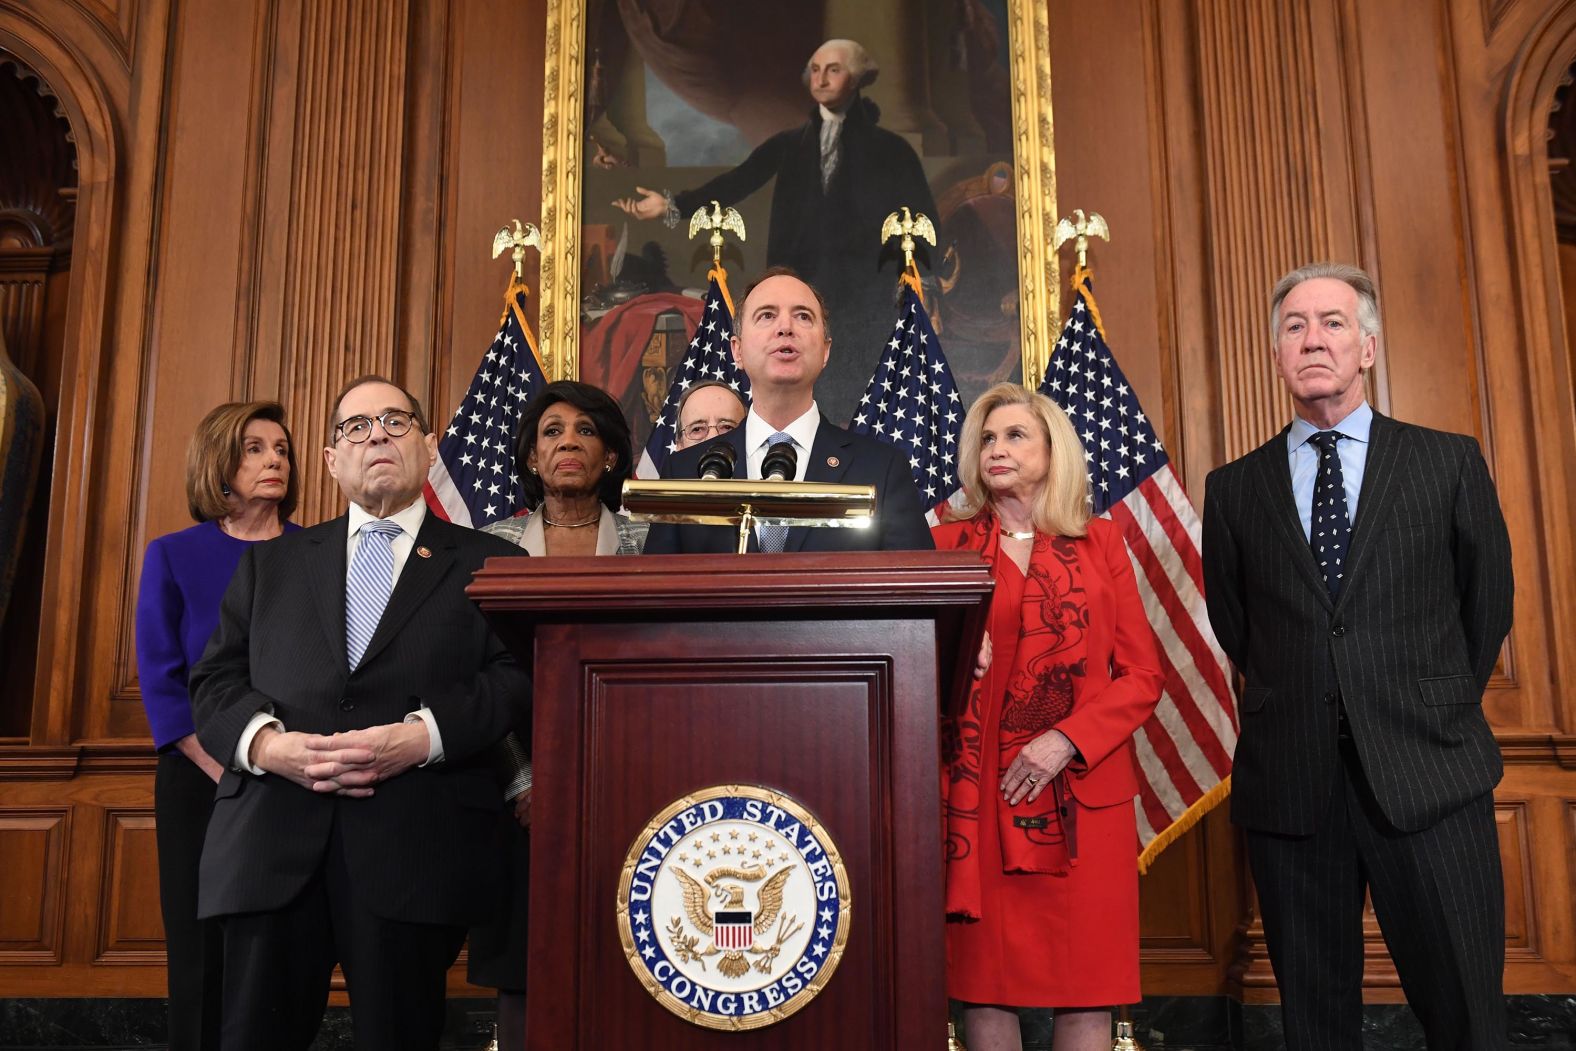 House Democratic leaders announce December 10 that they are bringing two articles of impeachment against President Trump. From left are House Speaker Nancy Pelosi, Judiciary Committee Chairman Jerry Nadler, Financial Services Committee Chairwoman Maxine Waters, Foreign Affairs Committee Chairman Eliot Engel, Intelligence Committee Chairman Adam Schiff, Oversight Committee Chairwoman Carolyn Maloney and Ways and Means Committee Chairman Richard Neal.